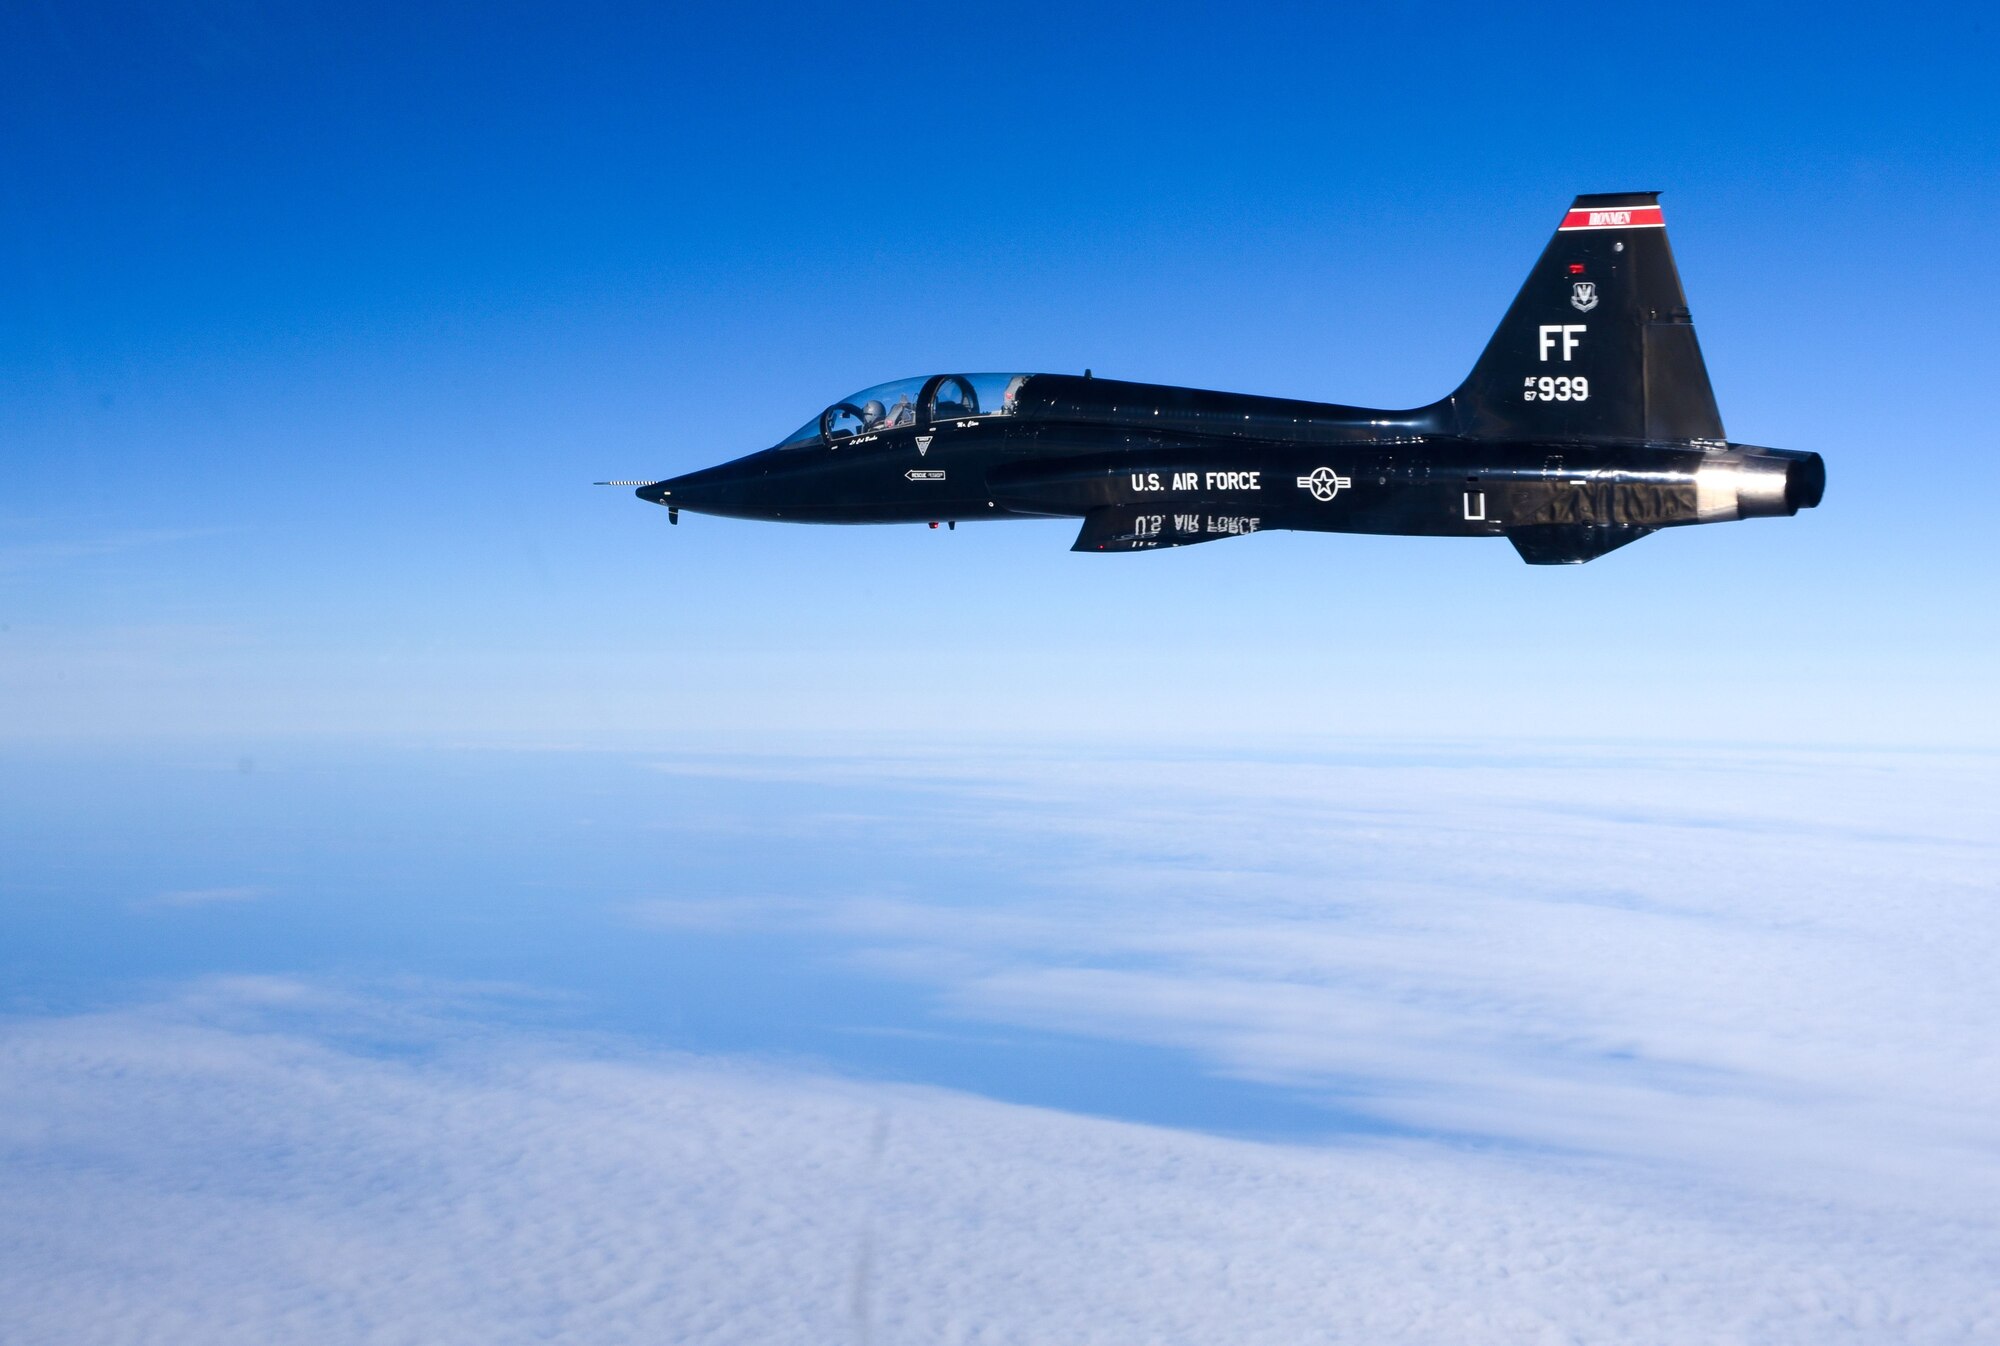 A pilot assigned to the 71st Fighter Training Squadron flies a T-38 Talon over the Atlantic Ocean, Jan. 24, 2018. The T-38 Talon is a twin-engine, high-altitude supersonic pilot trainer aircraft. (U.S. Air Force Photo by Staff Sgt. Carlin Leslie)